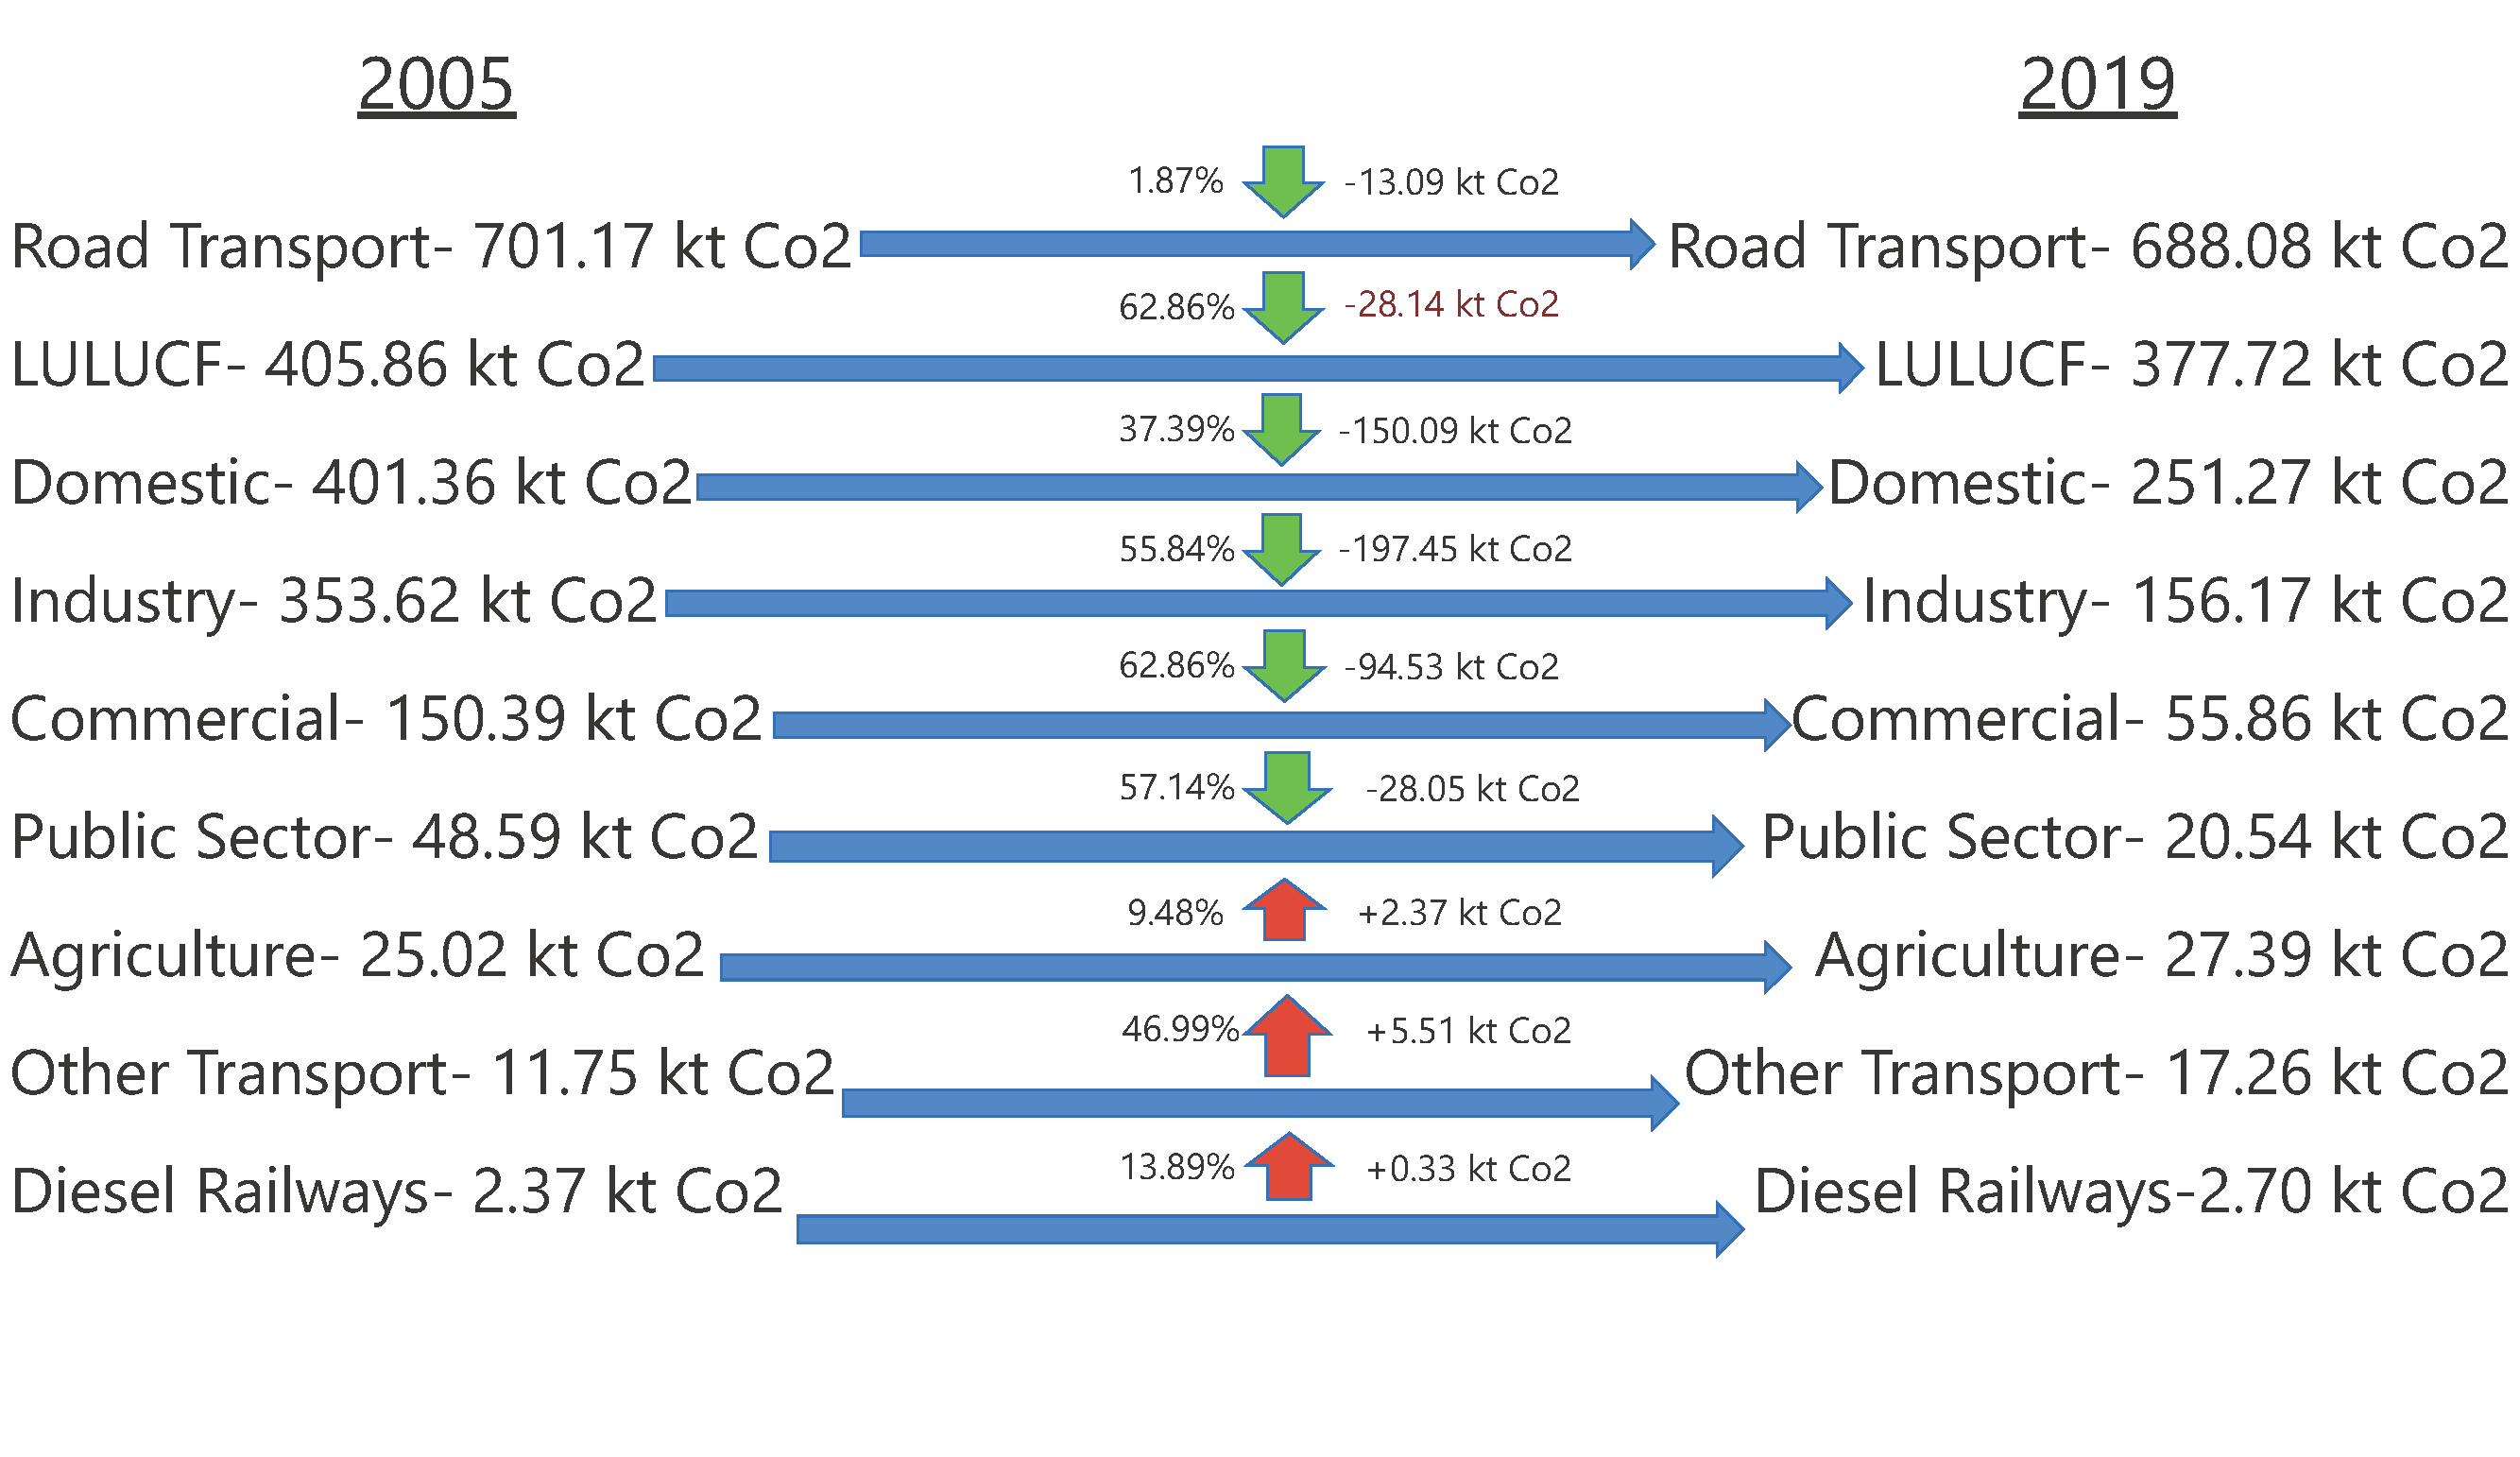 Picture showing the changes in co2 emissions top 10 subsectors  Cropland 2005 426.48 kilotons, 2019 403.84 kilotons  A roads 2005 421.36 kilotons, 2019 383.81 kilotons  Industry Electricity 2005 210.79 kilotons, 2019 61.55 kilotons  Domestic Gas 2005 186.3 kilotons,2019 160.03 kilotons  Domestic Electricity 2005 179.96 kilotons, 2019 63.24 kilotons  Motorways 2005 151.06 kilotons, 2019 160.81 kilotons  Commercial Electricity 2005 130.85 kilotons, 2019 38.97 kilotons  Minor Roads 2005 128.74 kilotons, 2019 143.41 kilotons  Industry fuels 2005 91.29 kilotons, 2019 77.62 kilotons  Industry Gas 2005 50.89 kilotons, 2019 16.27 kilotons